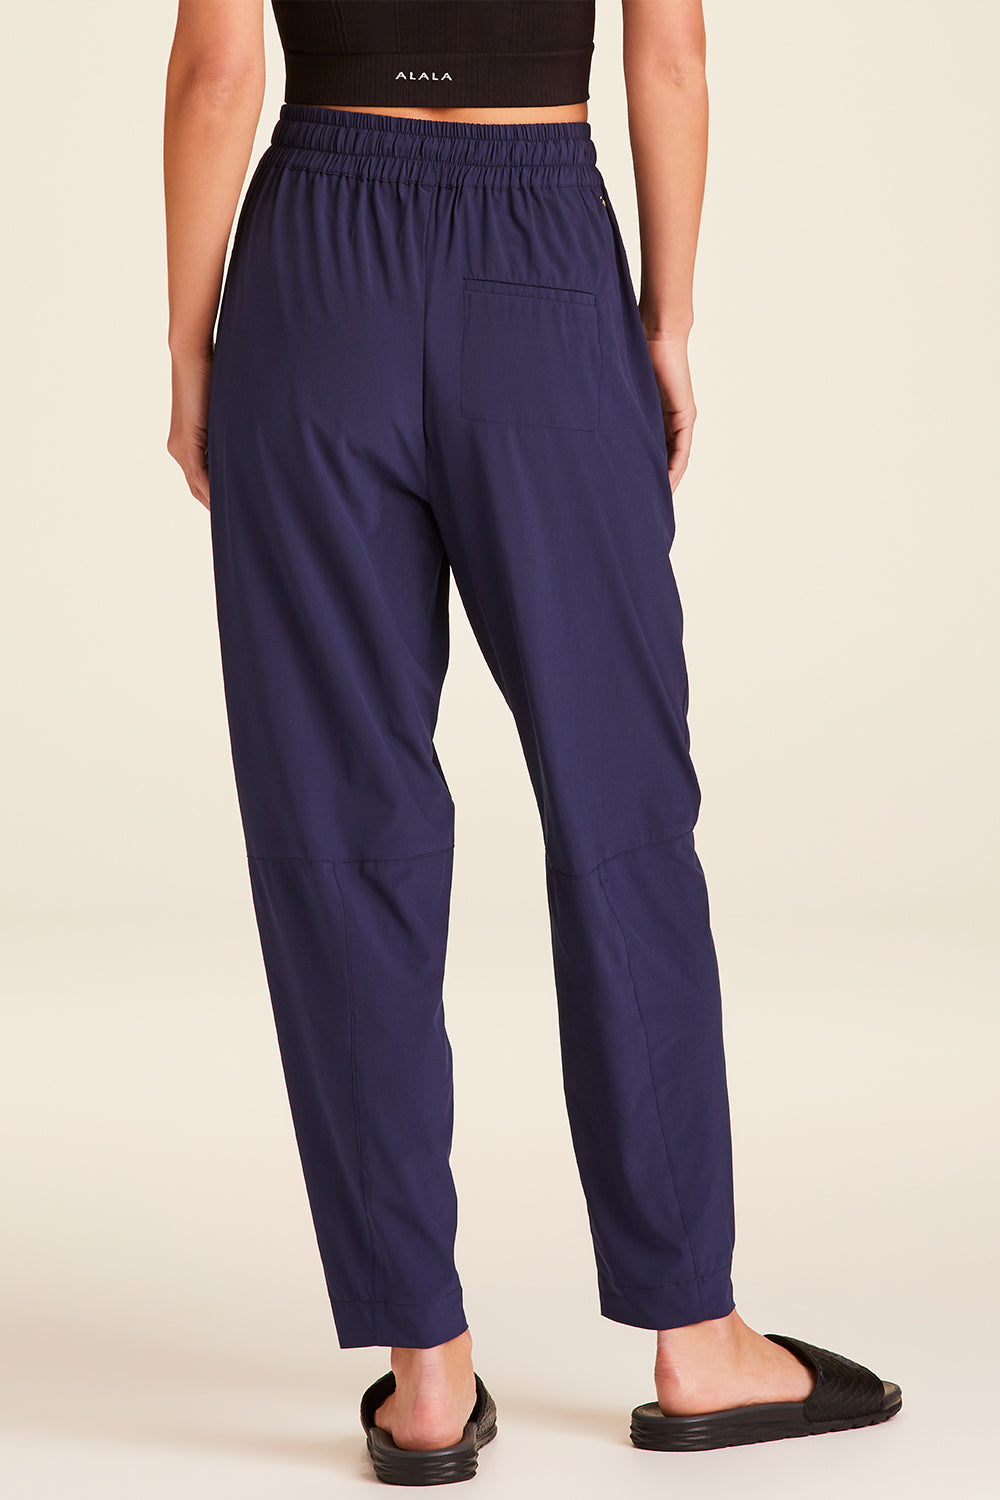 Back view of Alala Luxury Women's Athleisure commuter pant in navy